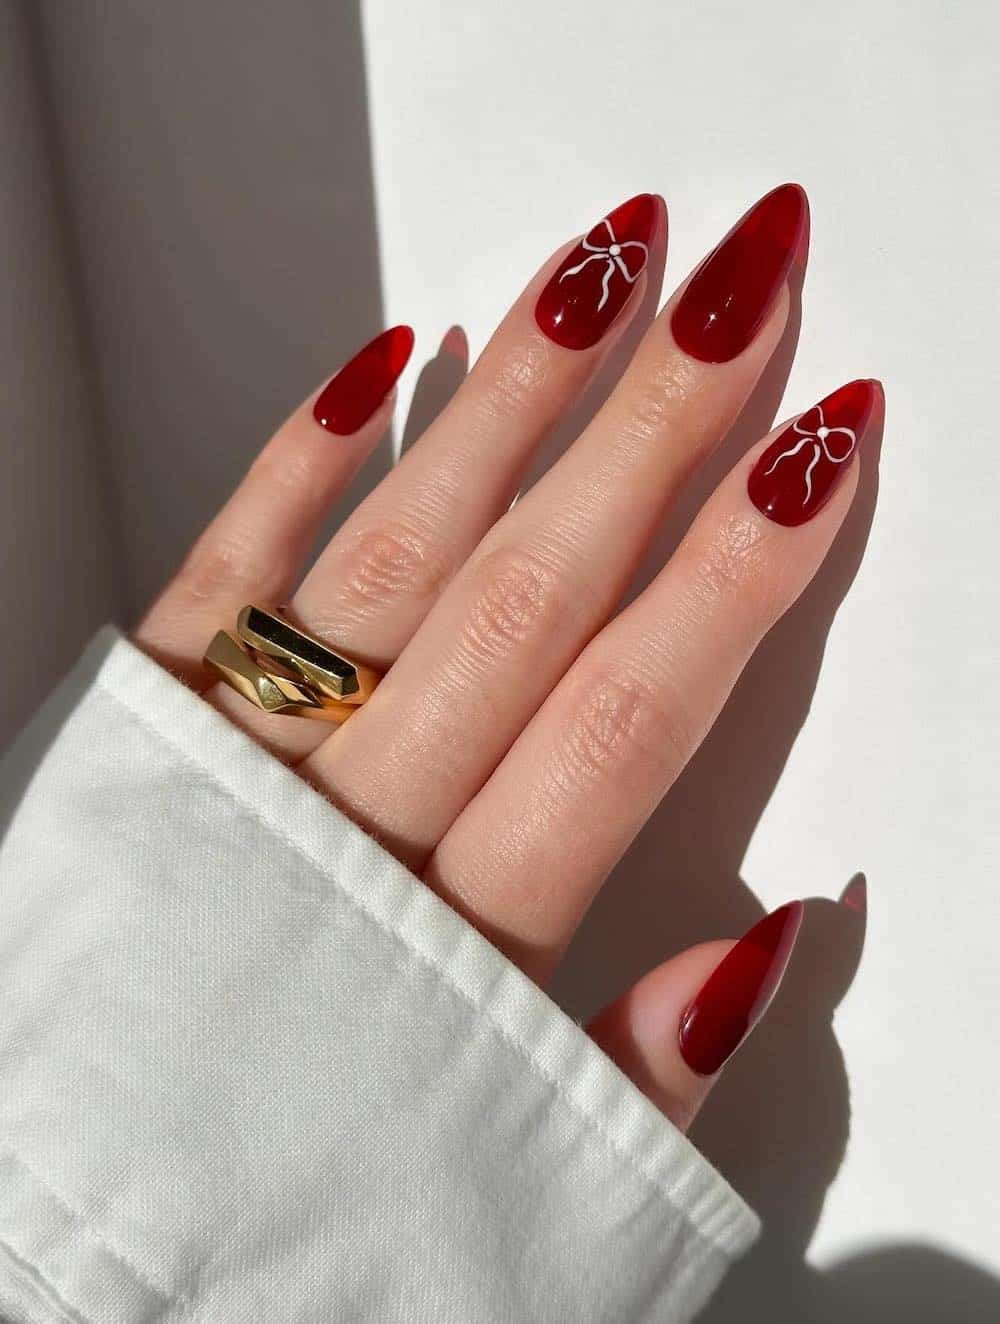 A hand with long red almond nails with white bow nail art accents